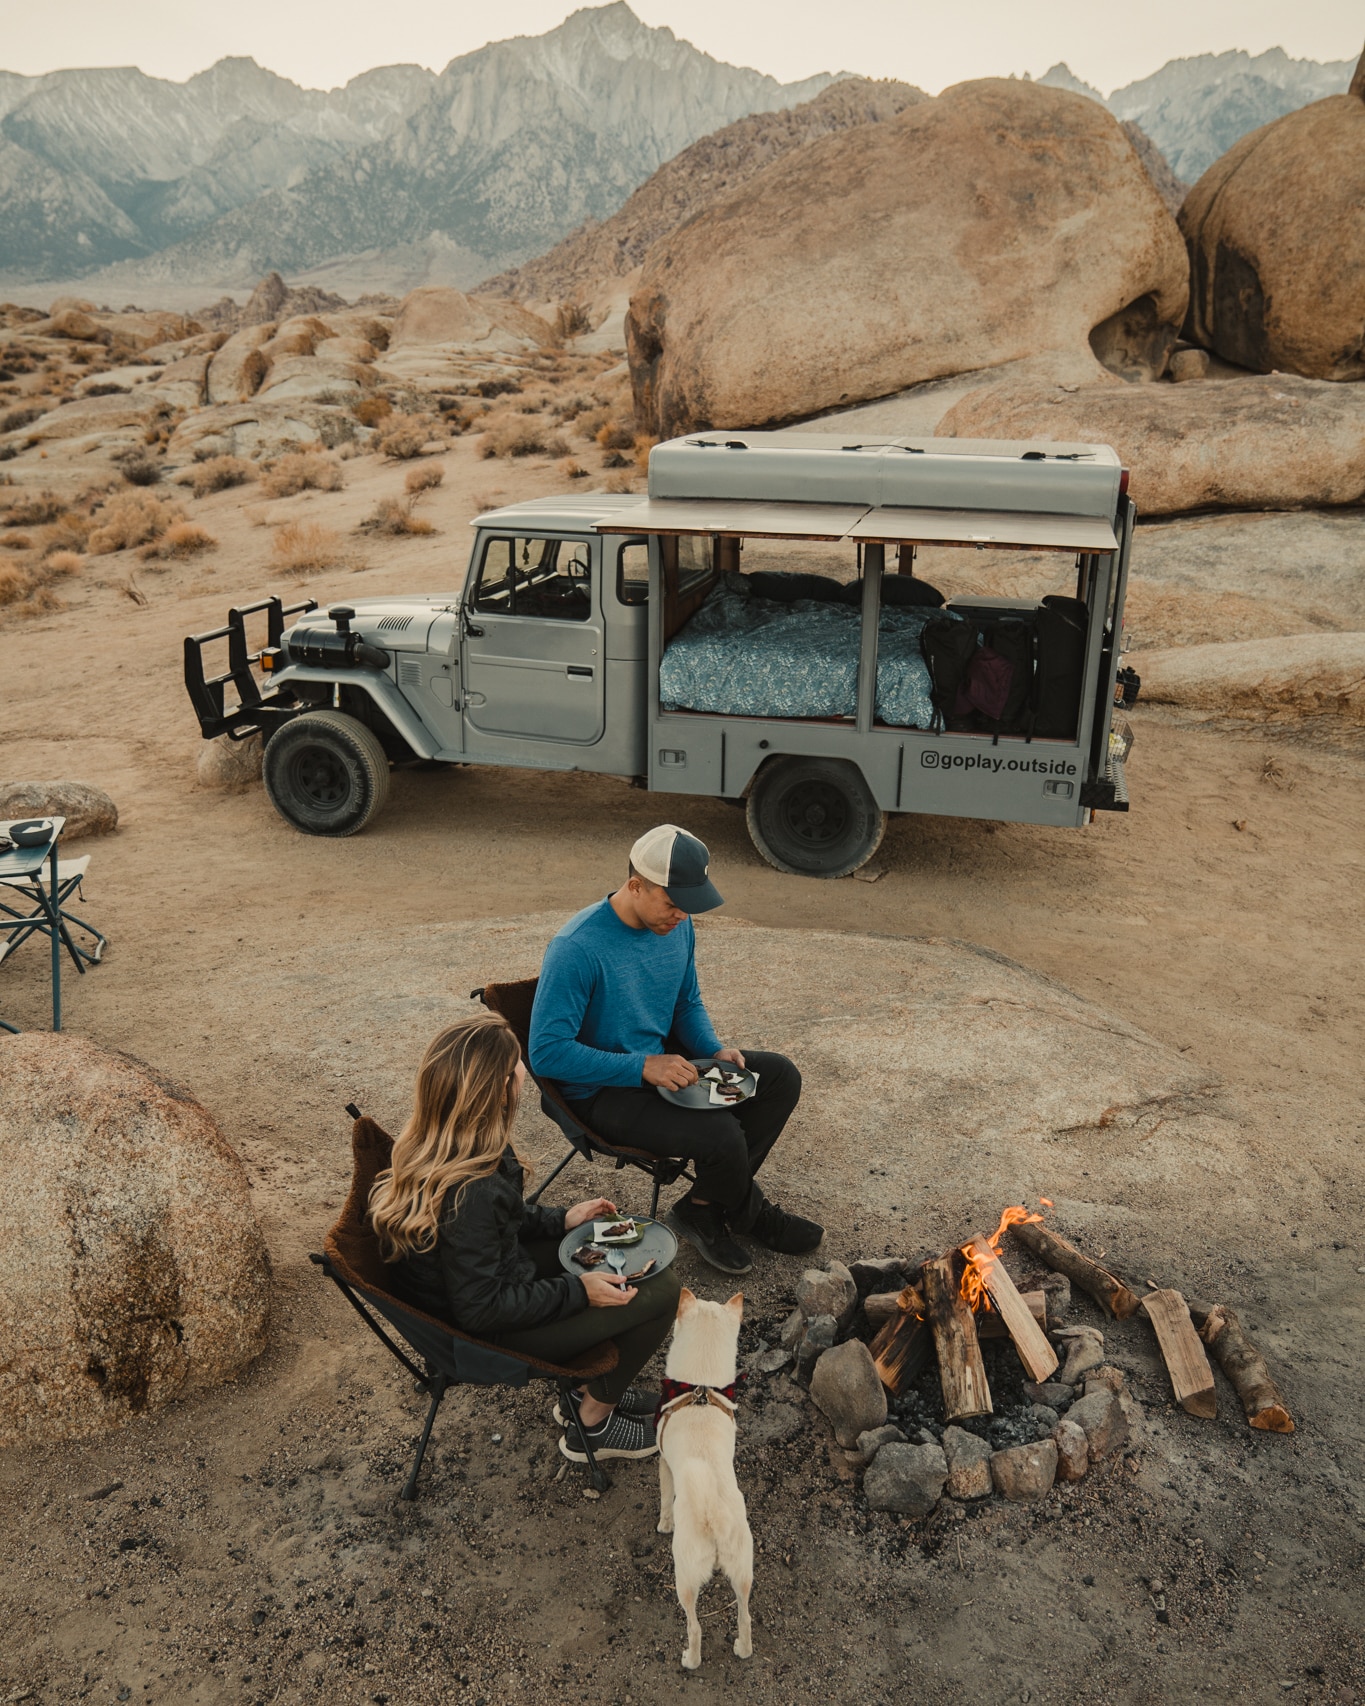 Go Play Outside at a campfire next to their Land Cruiser